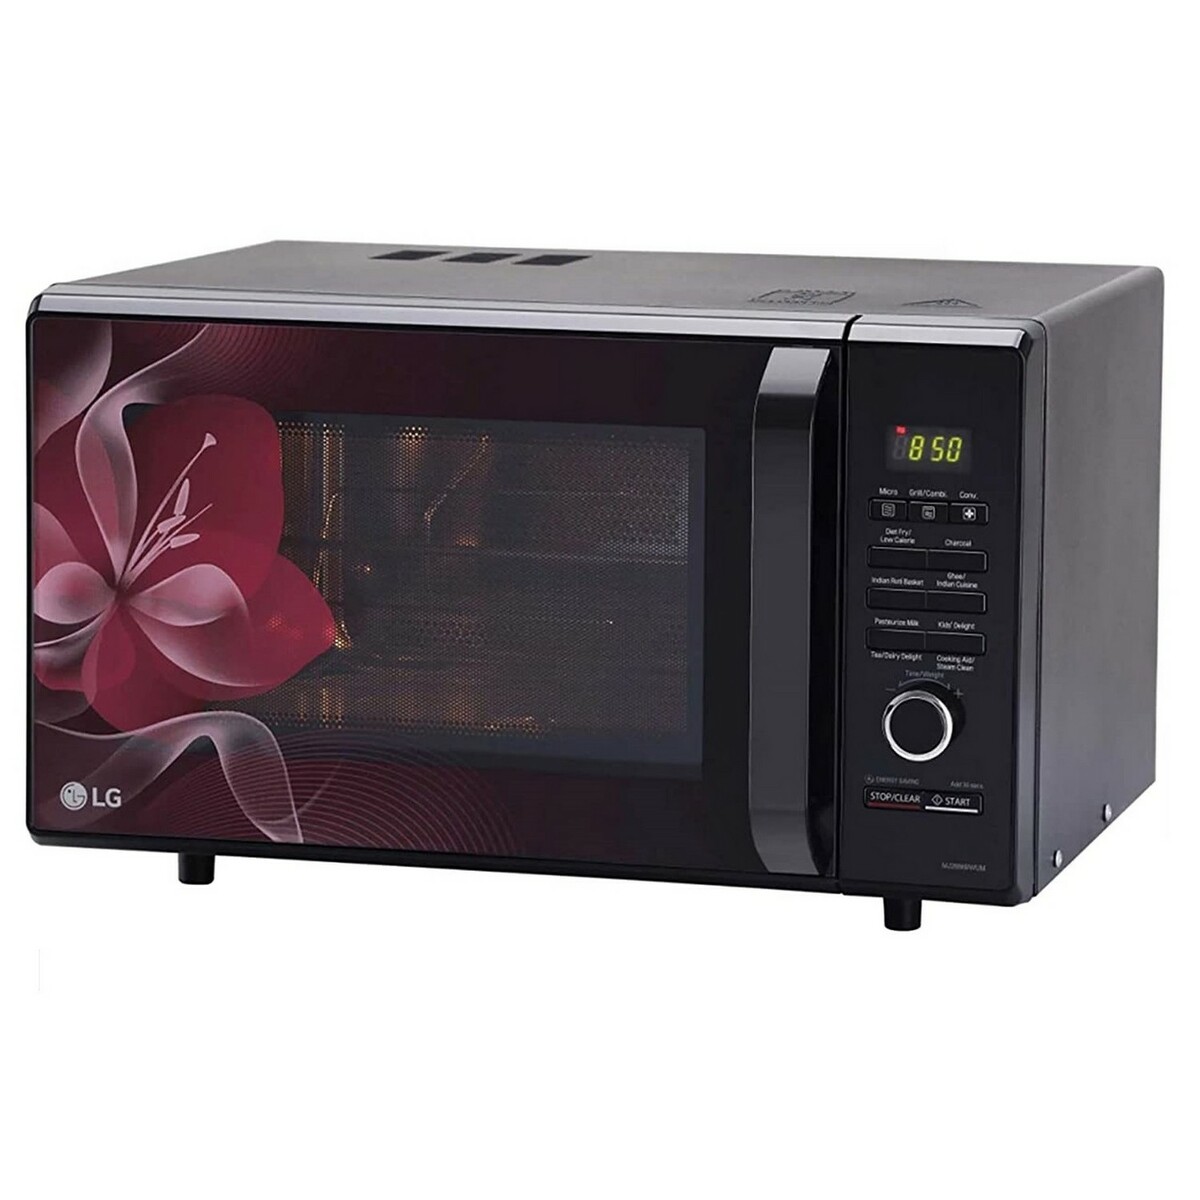 LG Microwave Oven All In One MJ2886BWUM 28Ltr